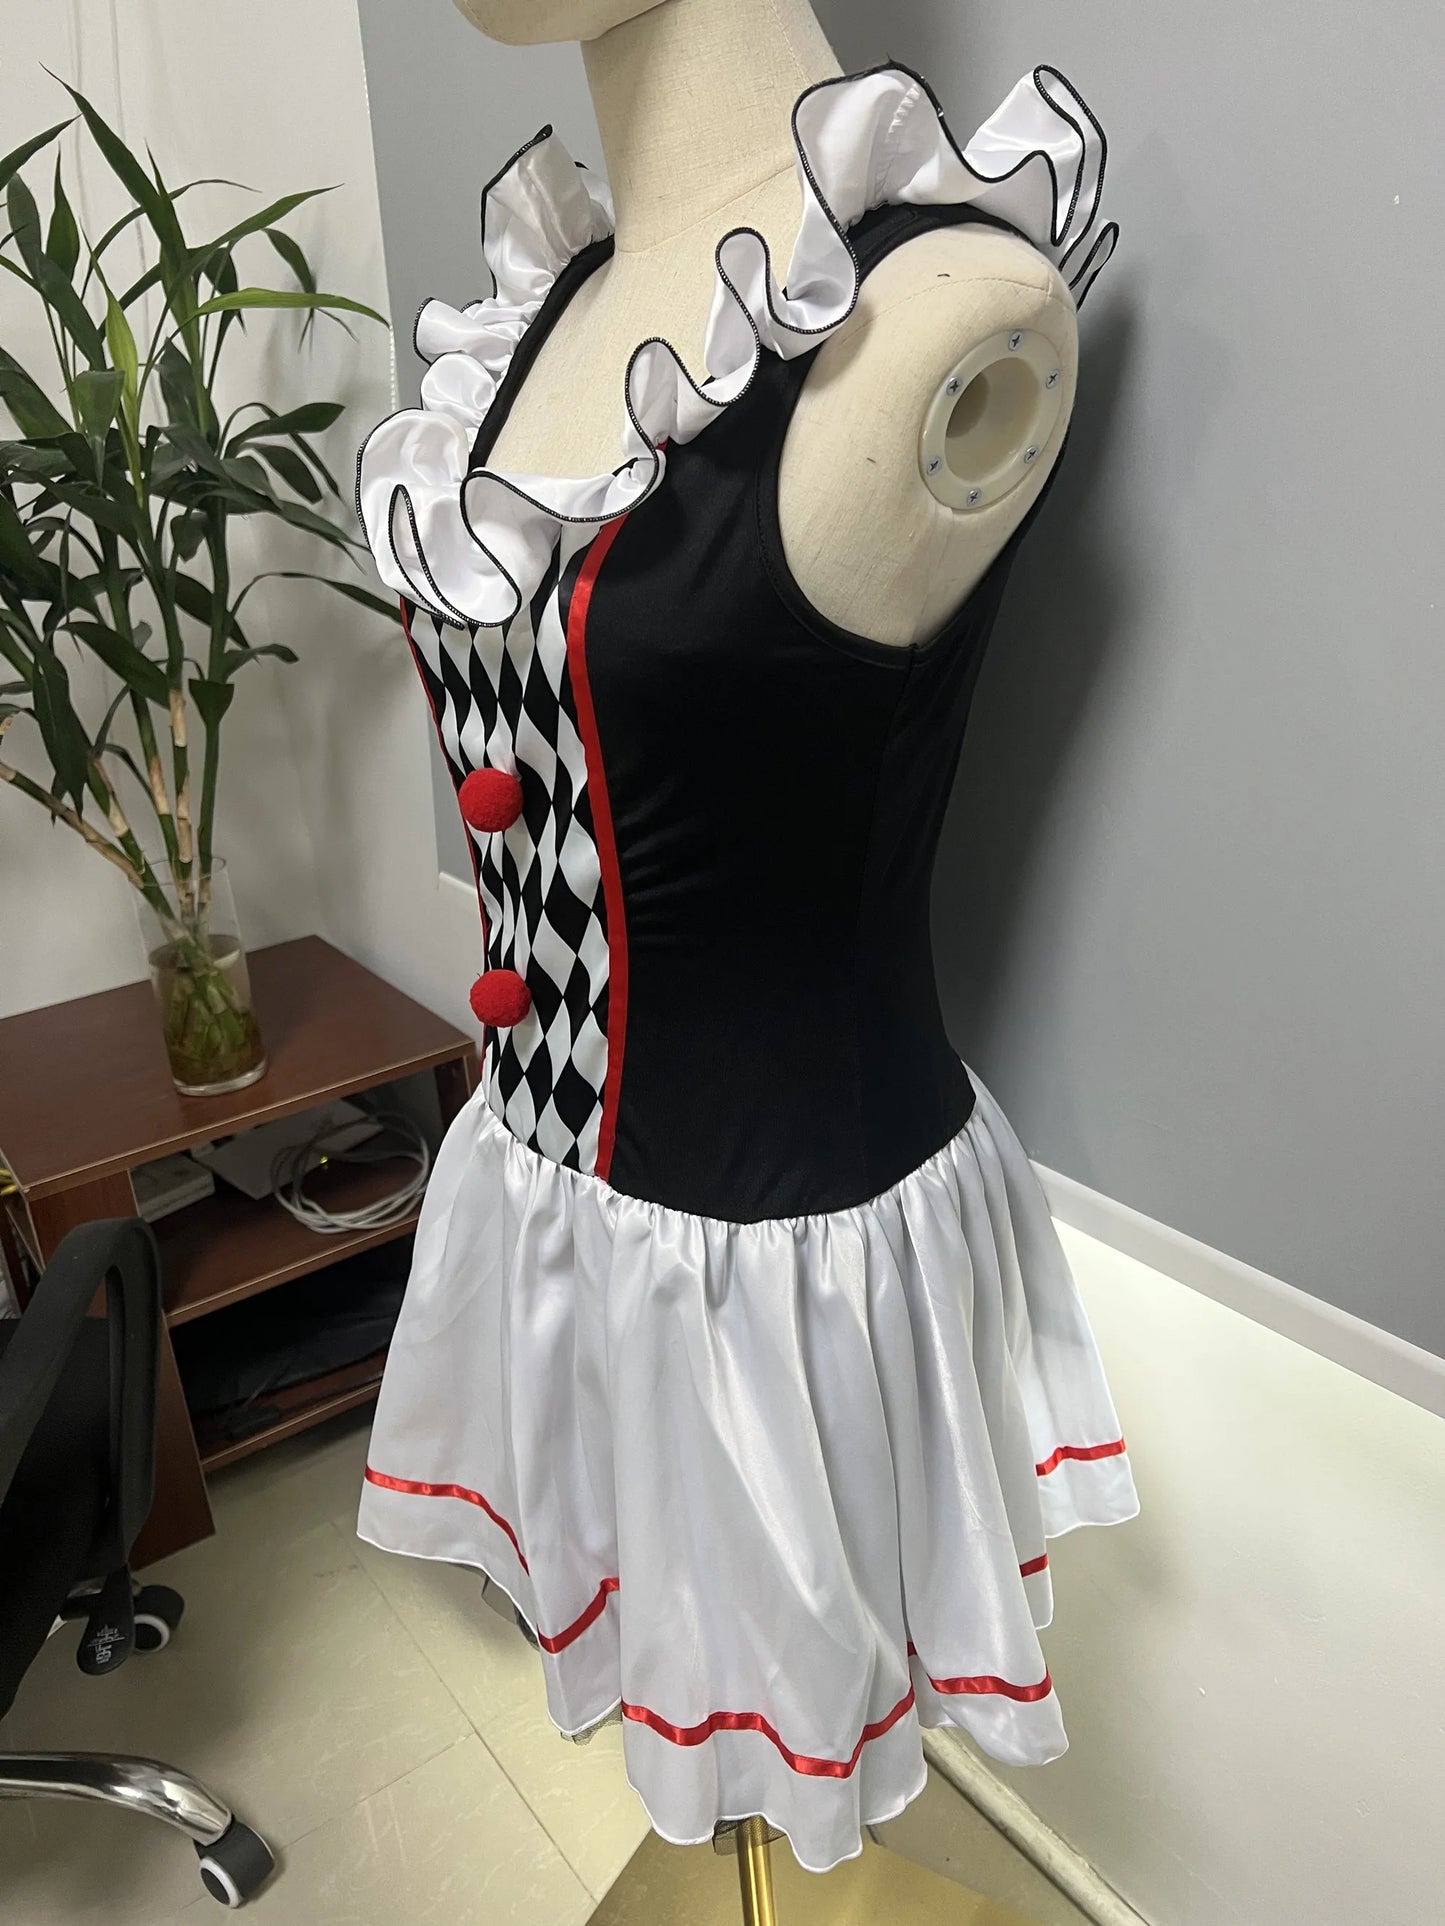 Halloween Costume for Women Circus Clown Joker Costume Horror Cosplay Costumes Adult Party Stage Performance Dress